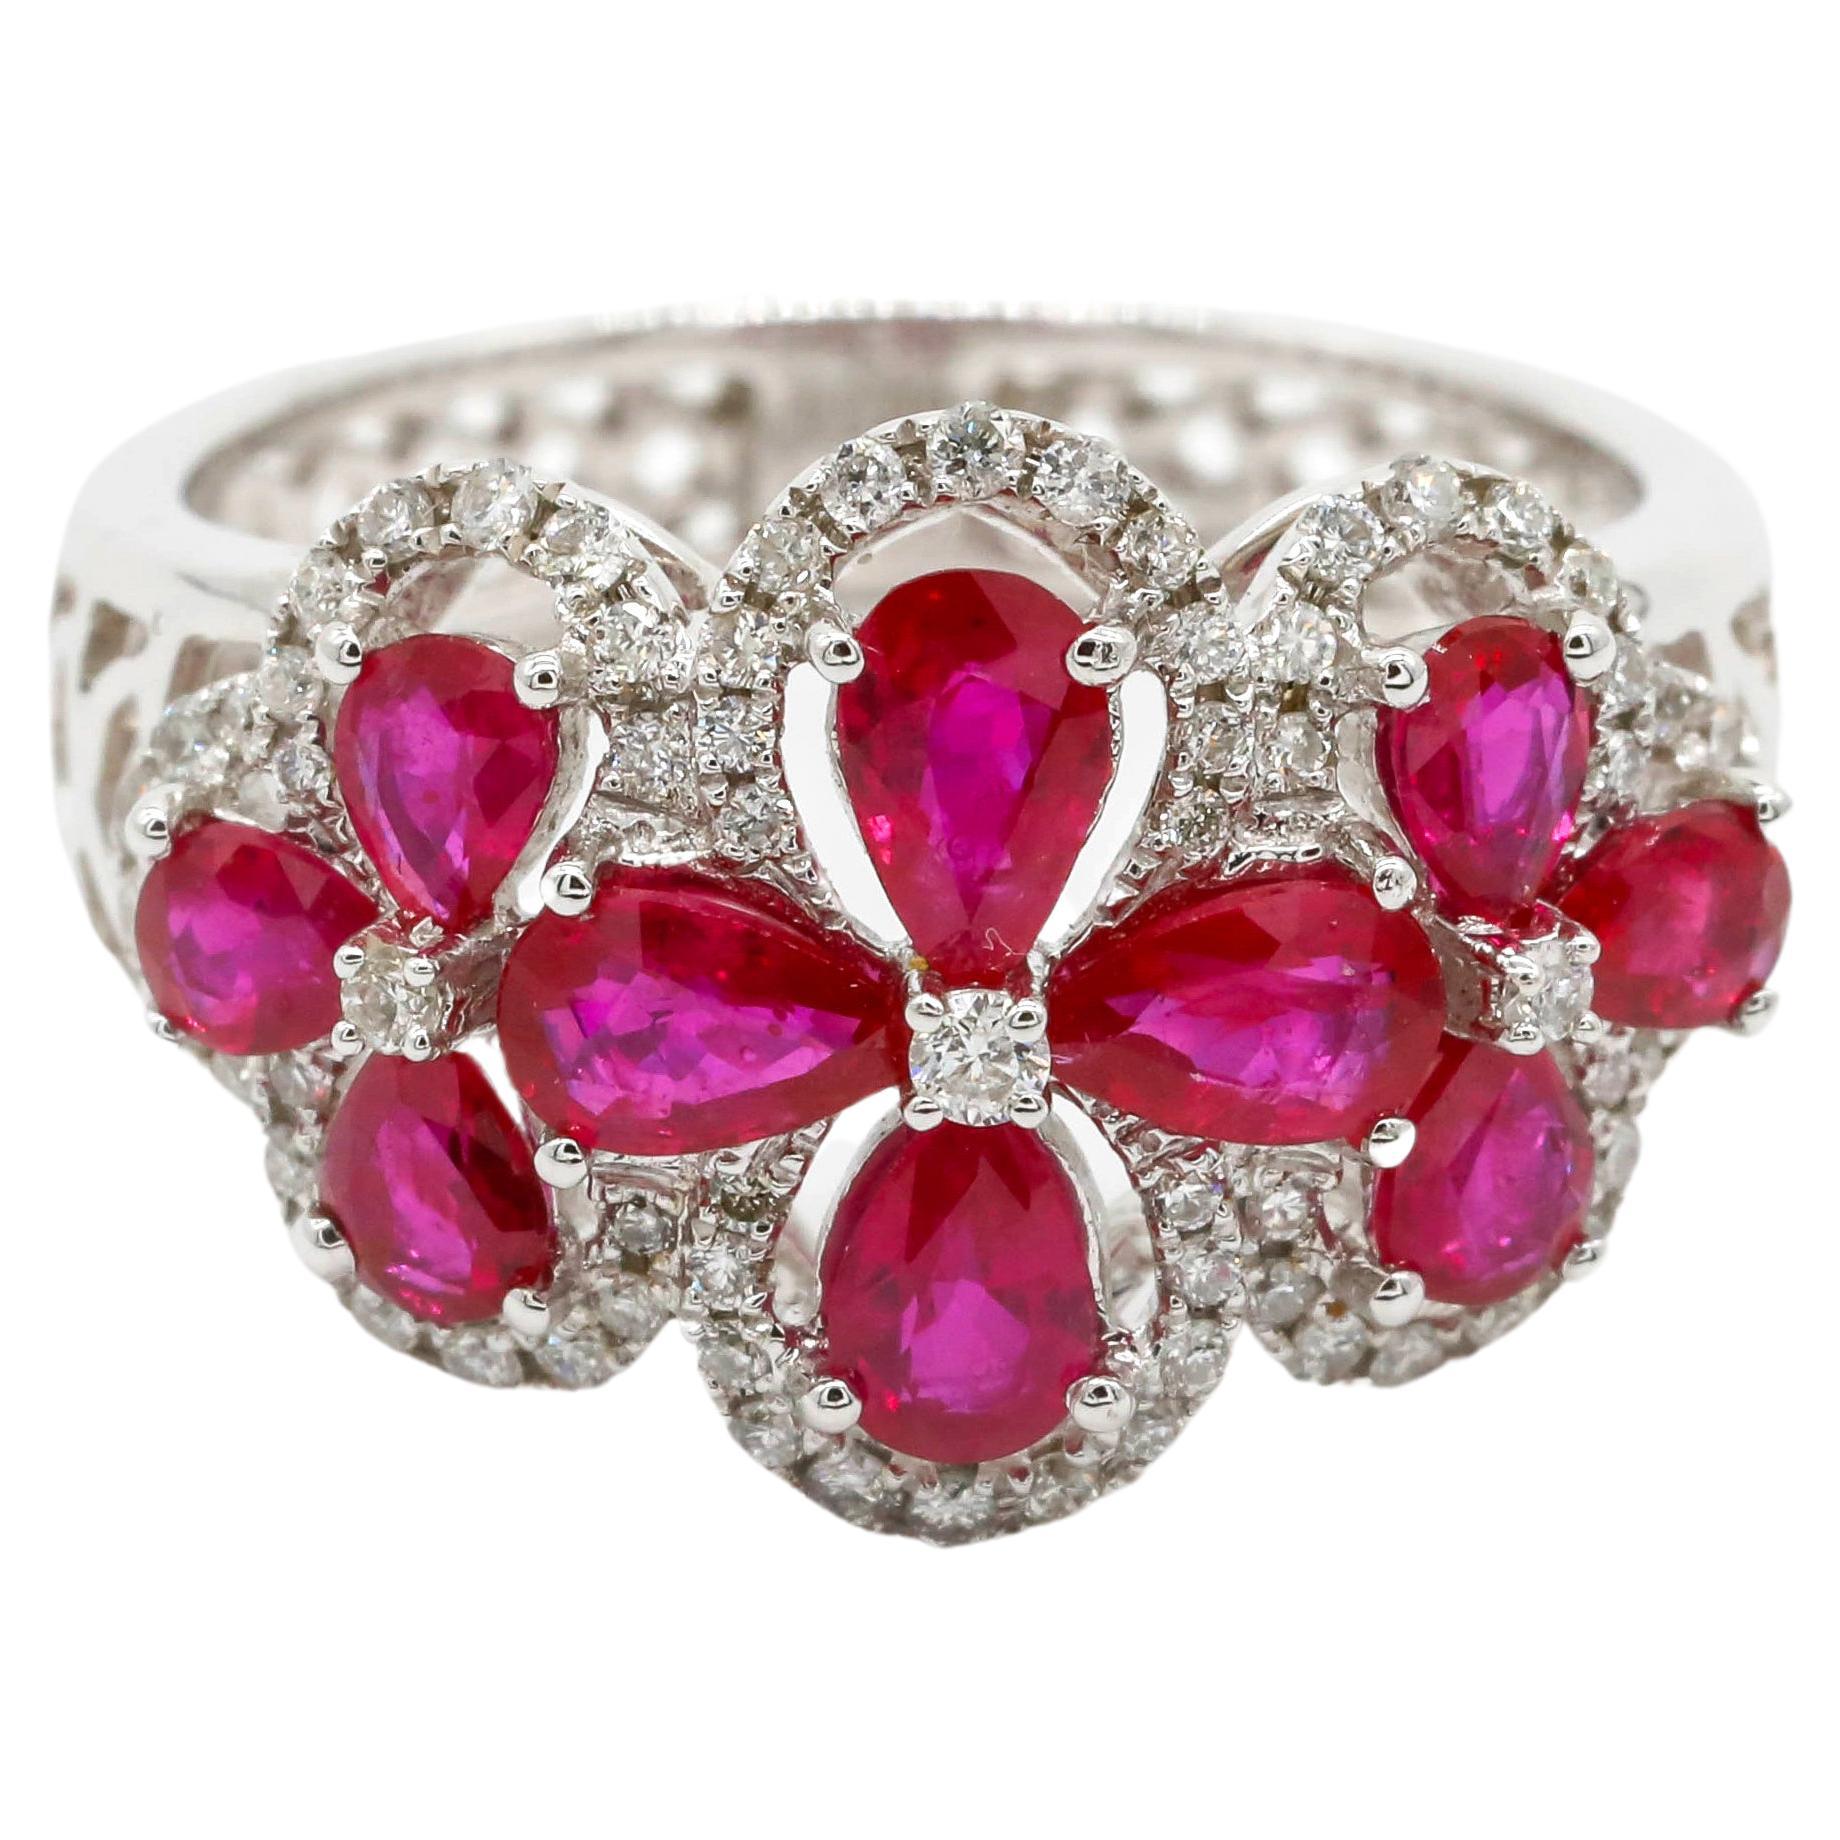 1.91 Carat Pear Cut Ruby and 0.34 Carat Diamond Pave 18K White Gold Cluster Ring For Sale